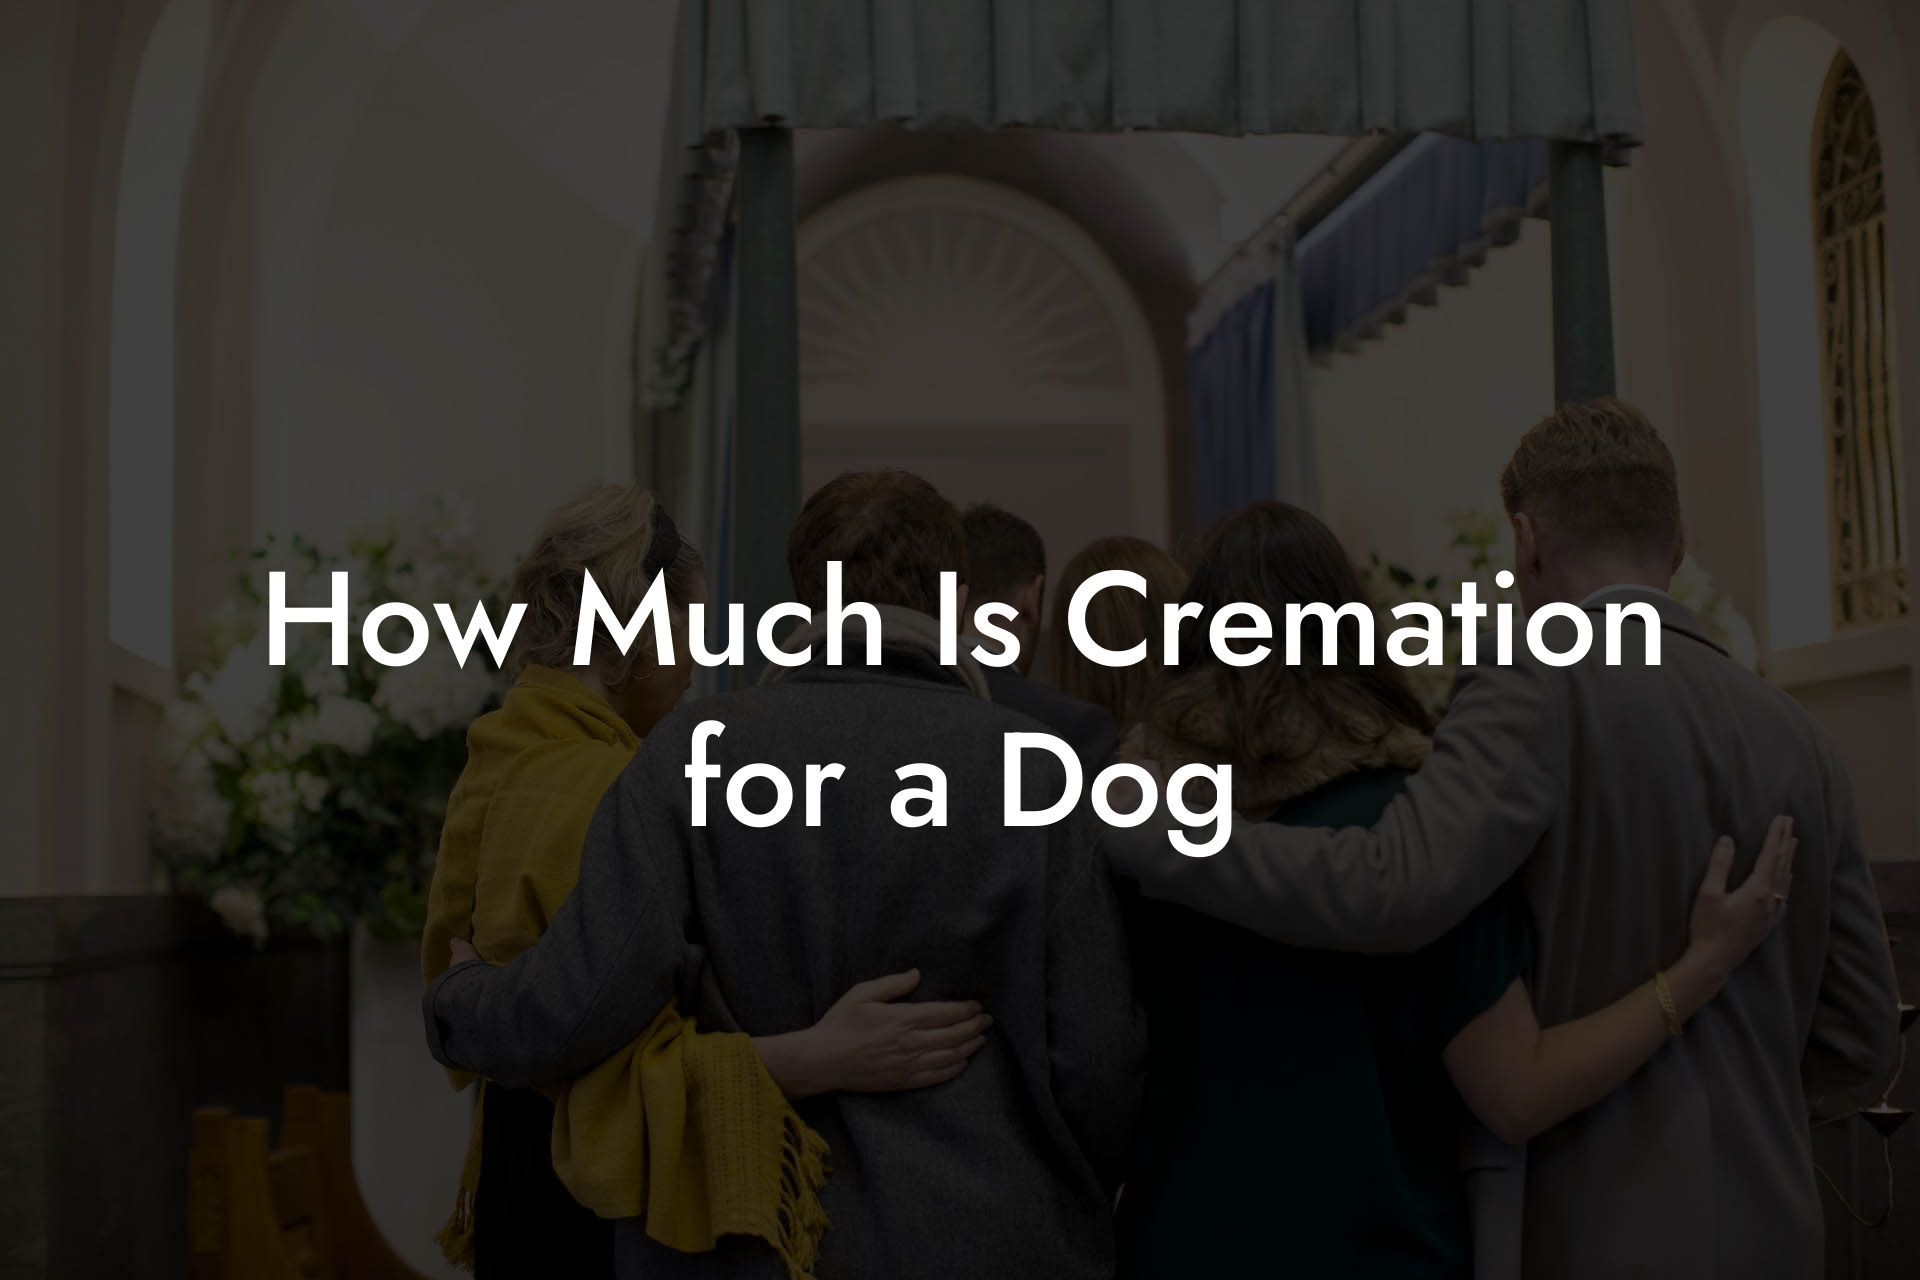 How Much Is Cremation for a Dog